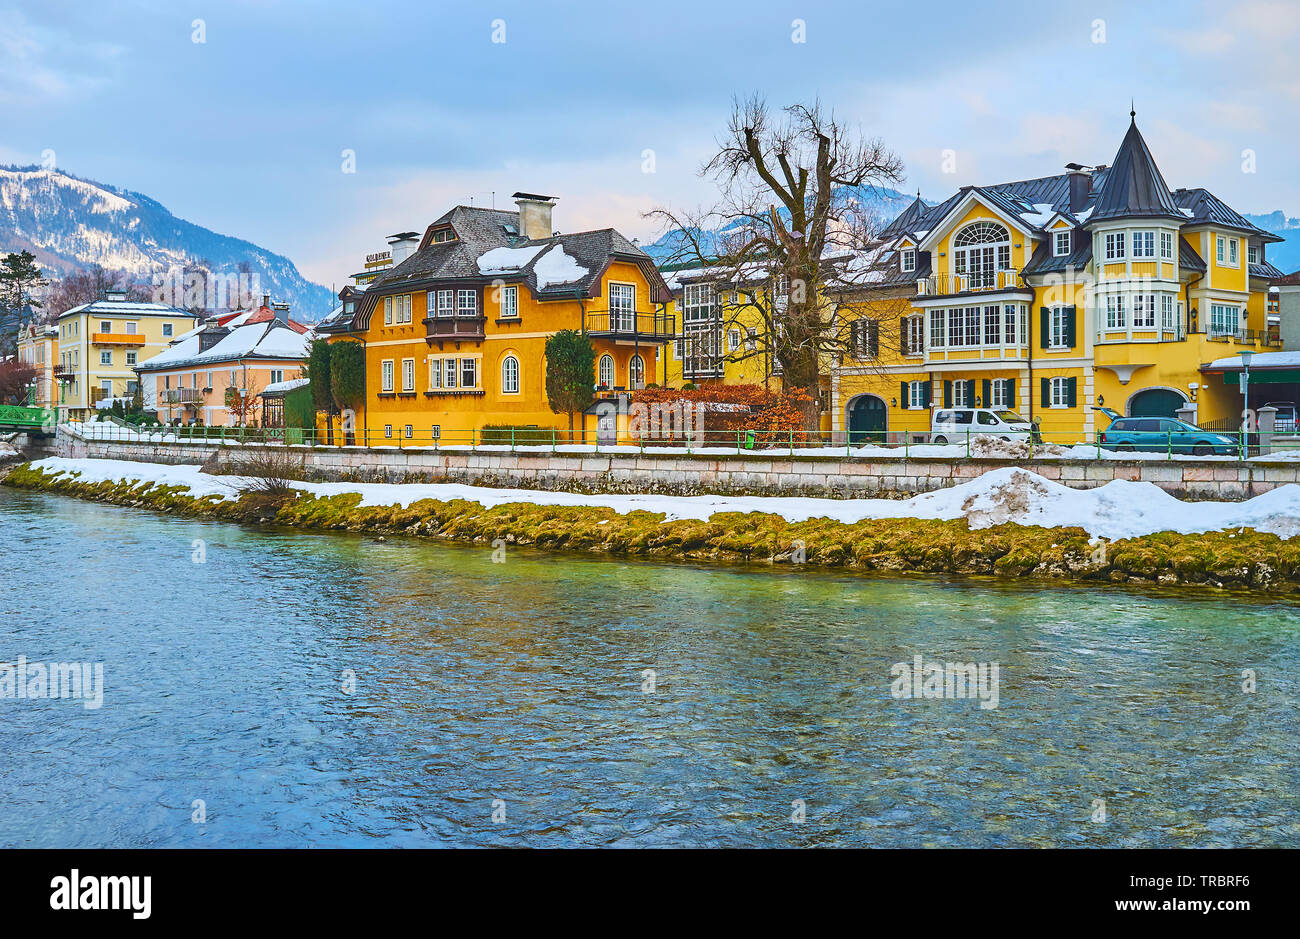 Bad Ischl boasts numerous preserved historic townhouses and mansions, the most interesting are located along the Traun river, Salzkammergut, Austria Stock Photo